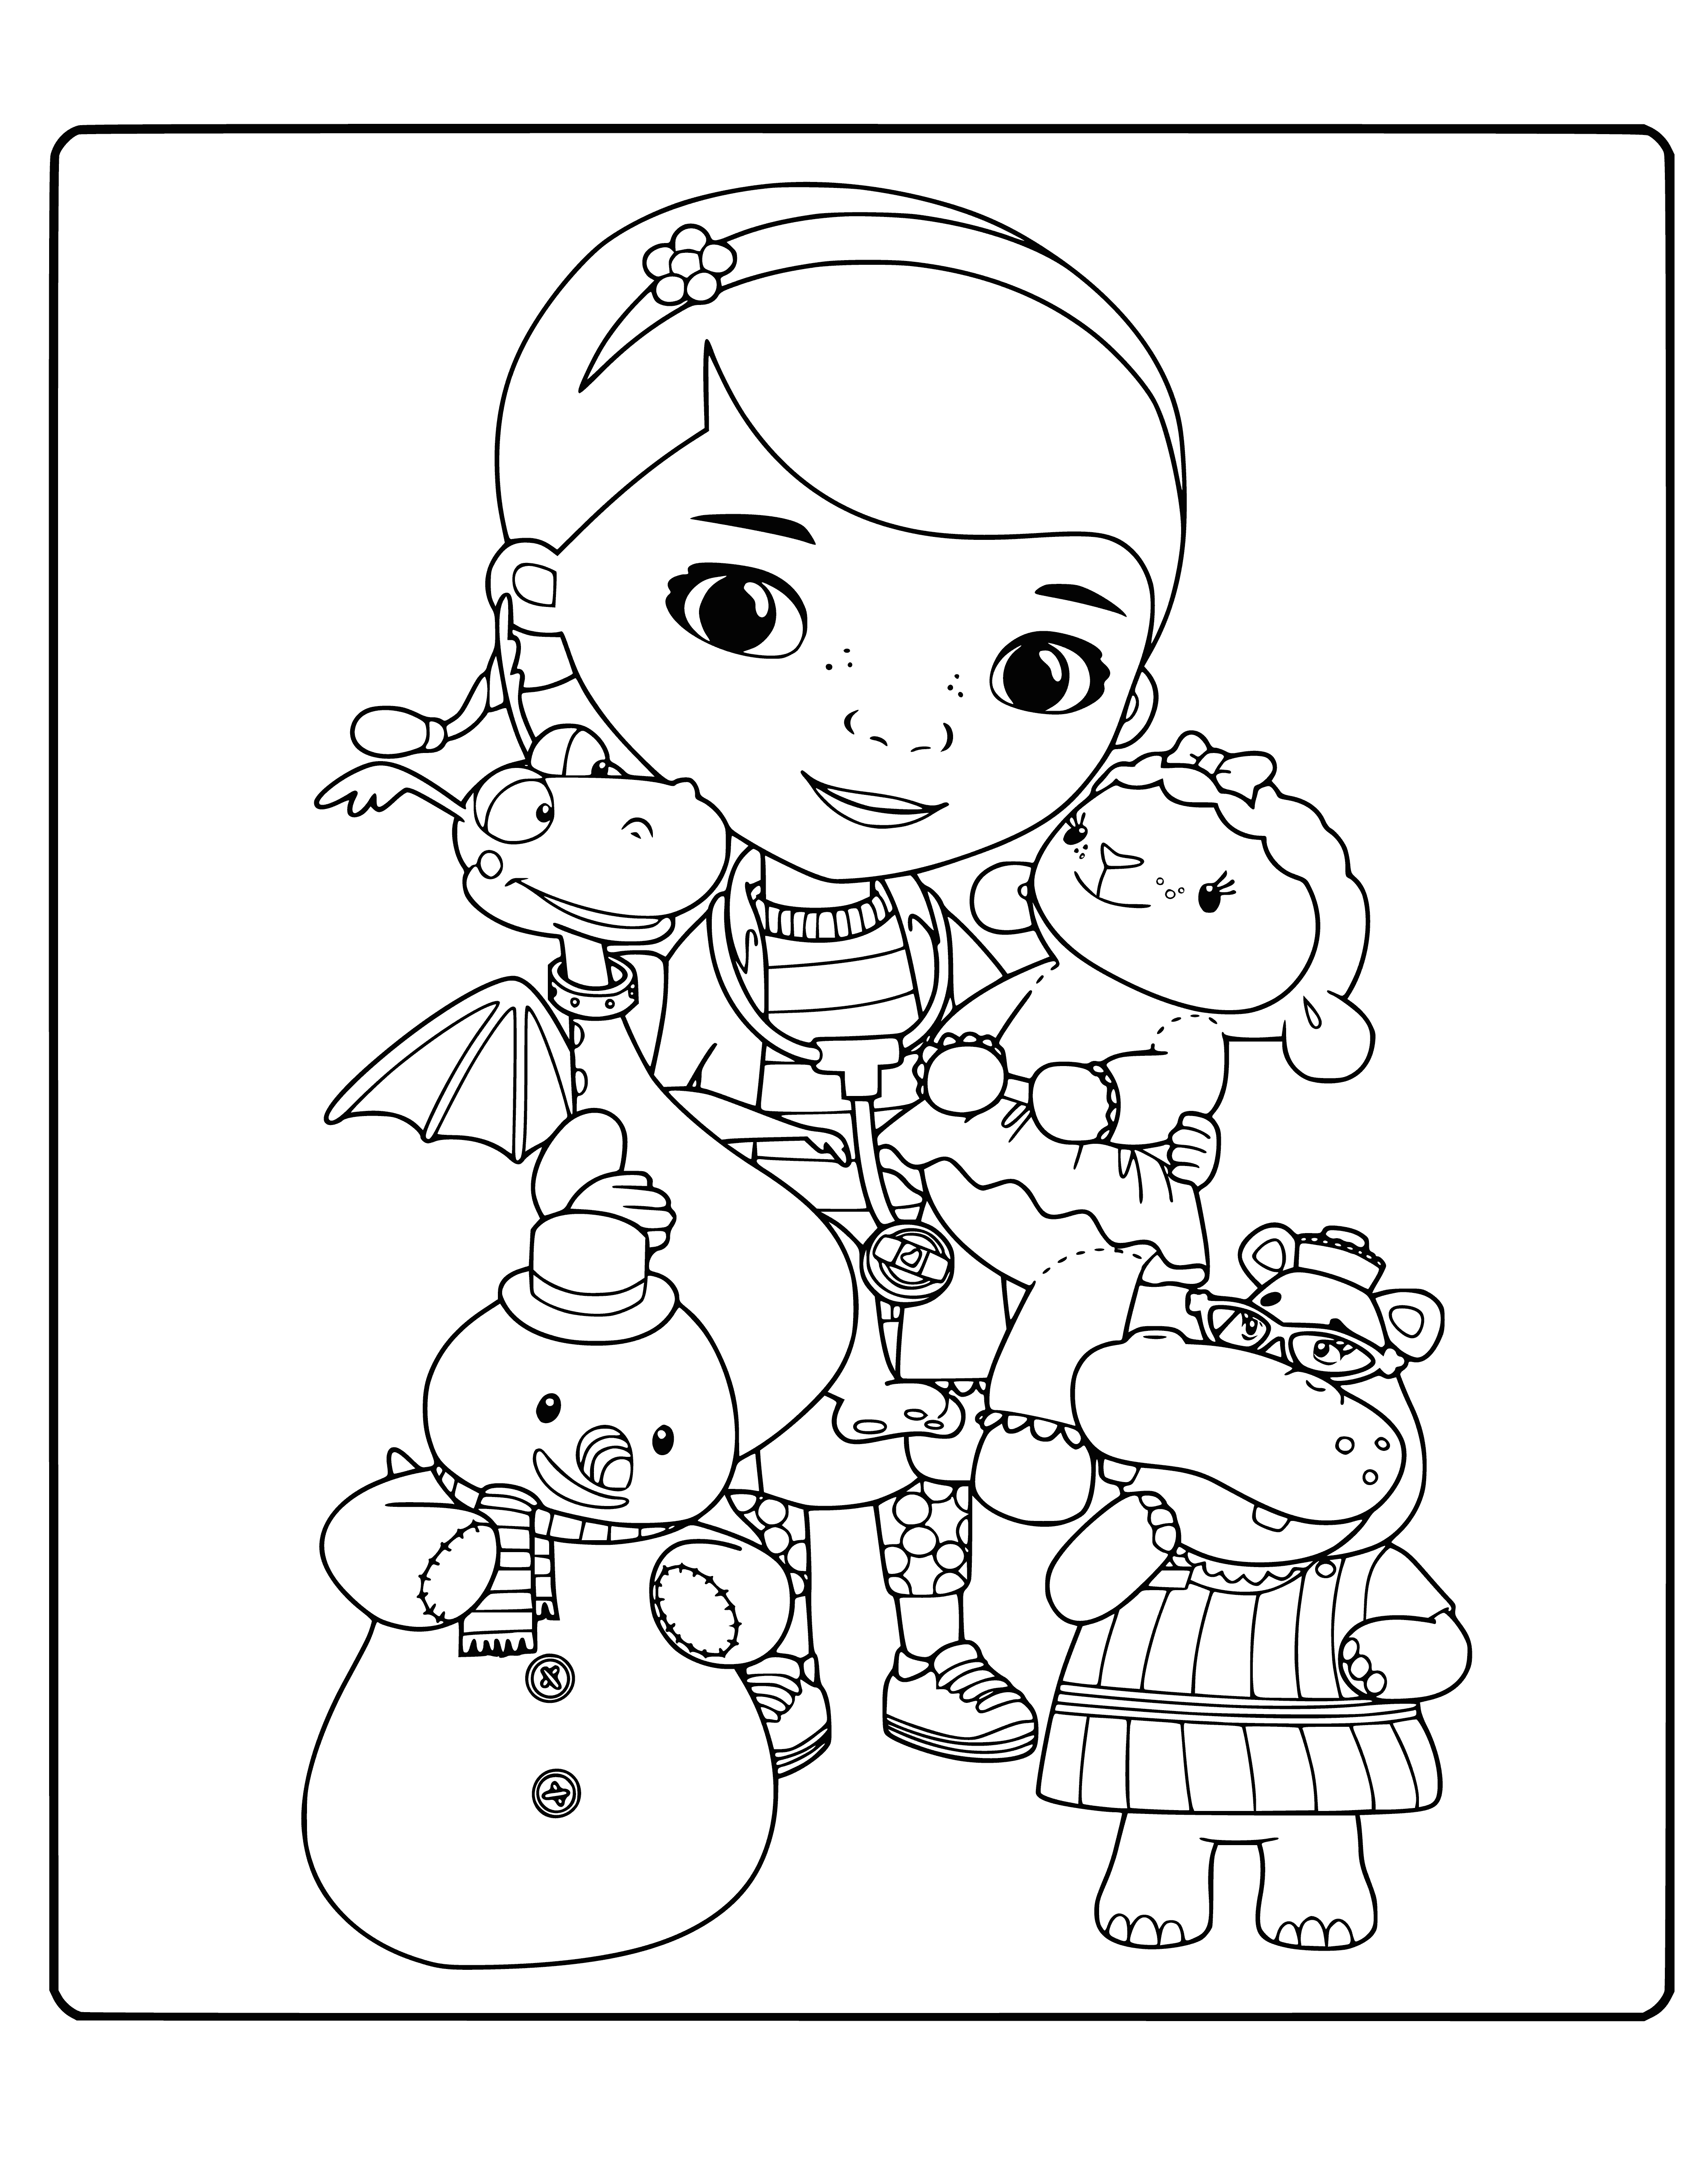 coloring page: Friends have a good time in Doc's room with a stuffed lamb, blue whale and brown teddy. All wearing smiles, even the lamb with a bandage on its leg.